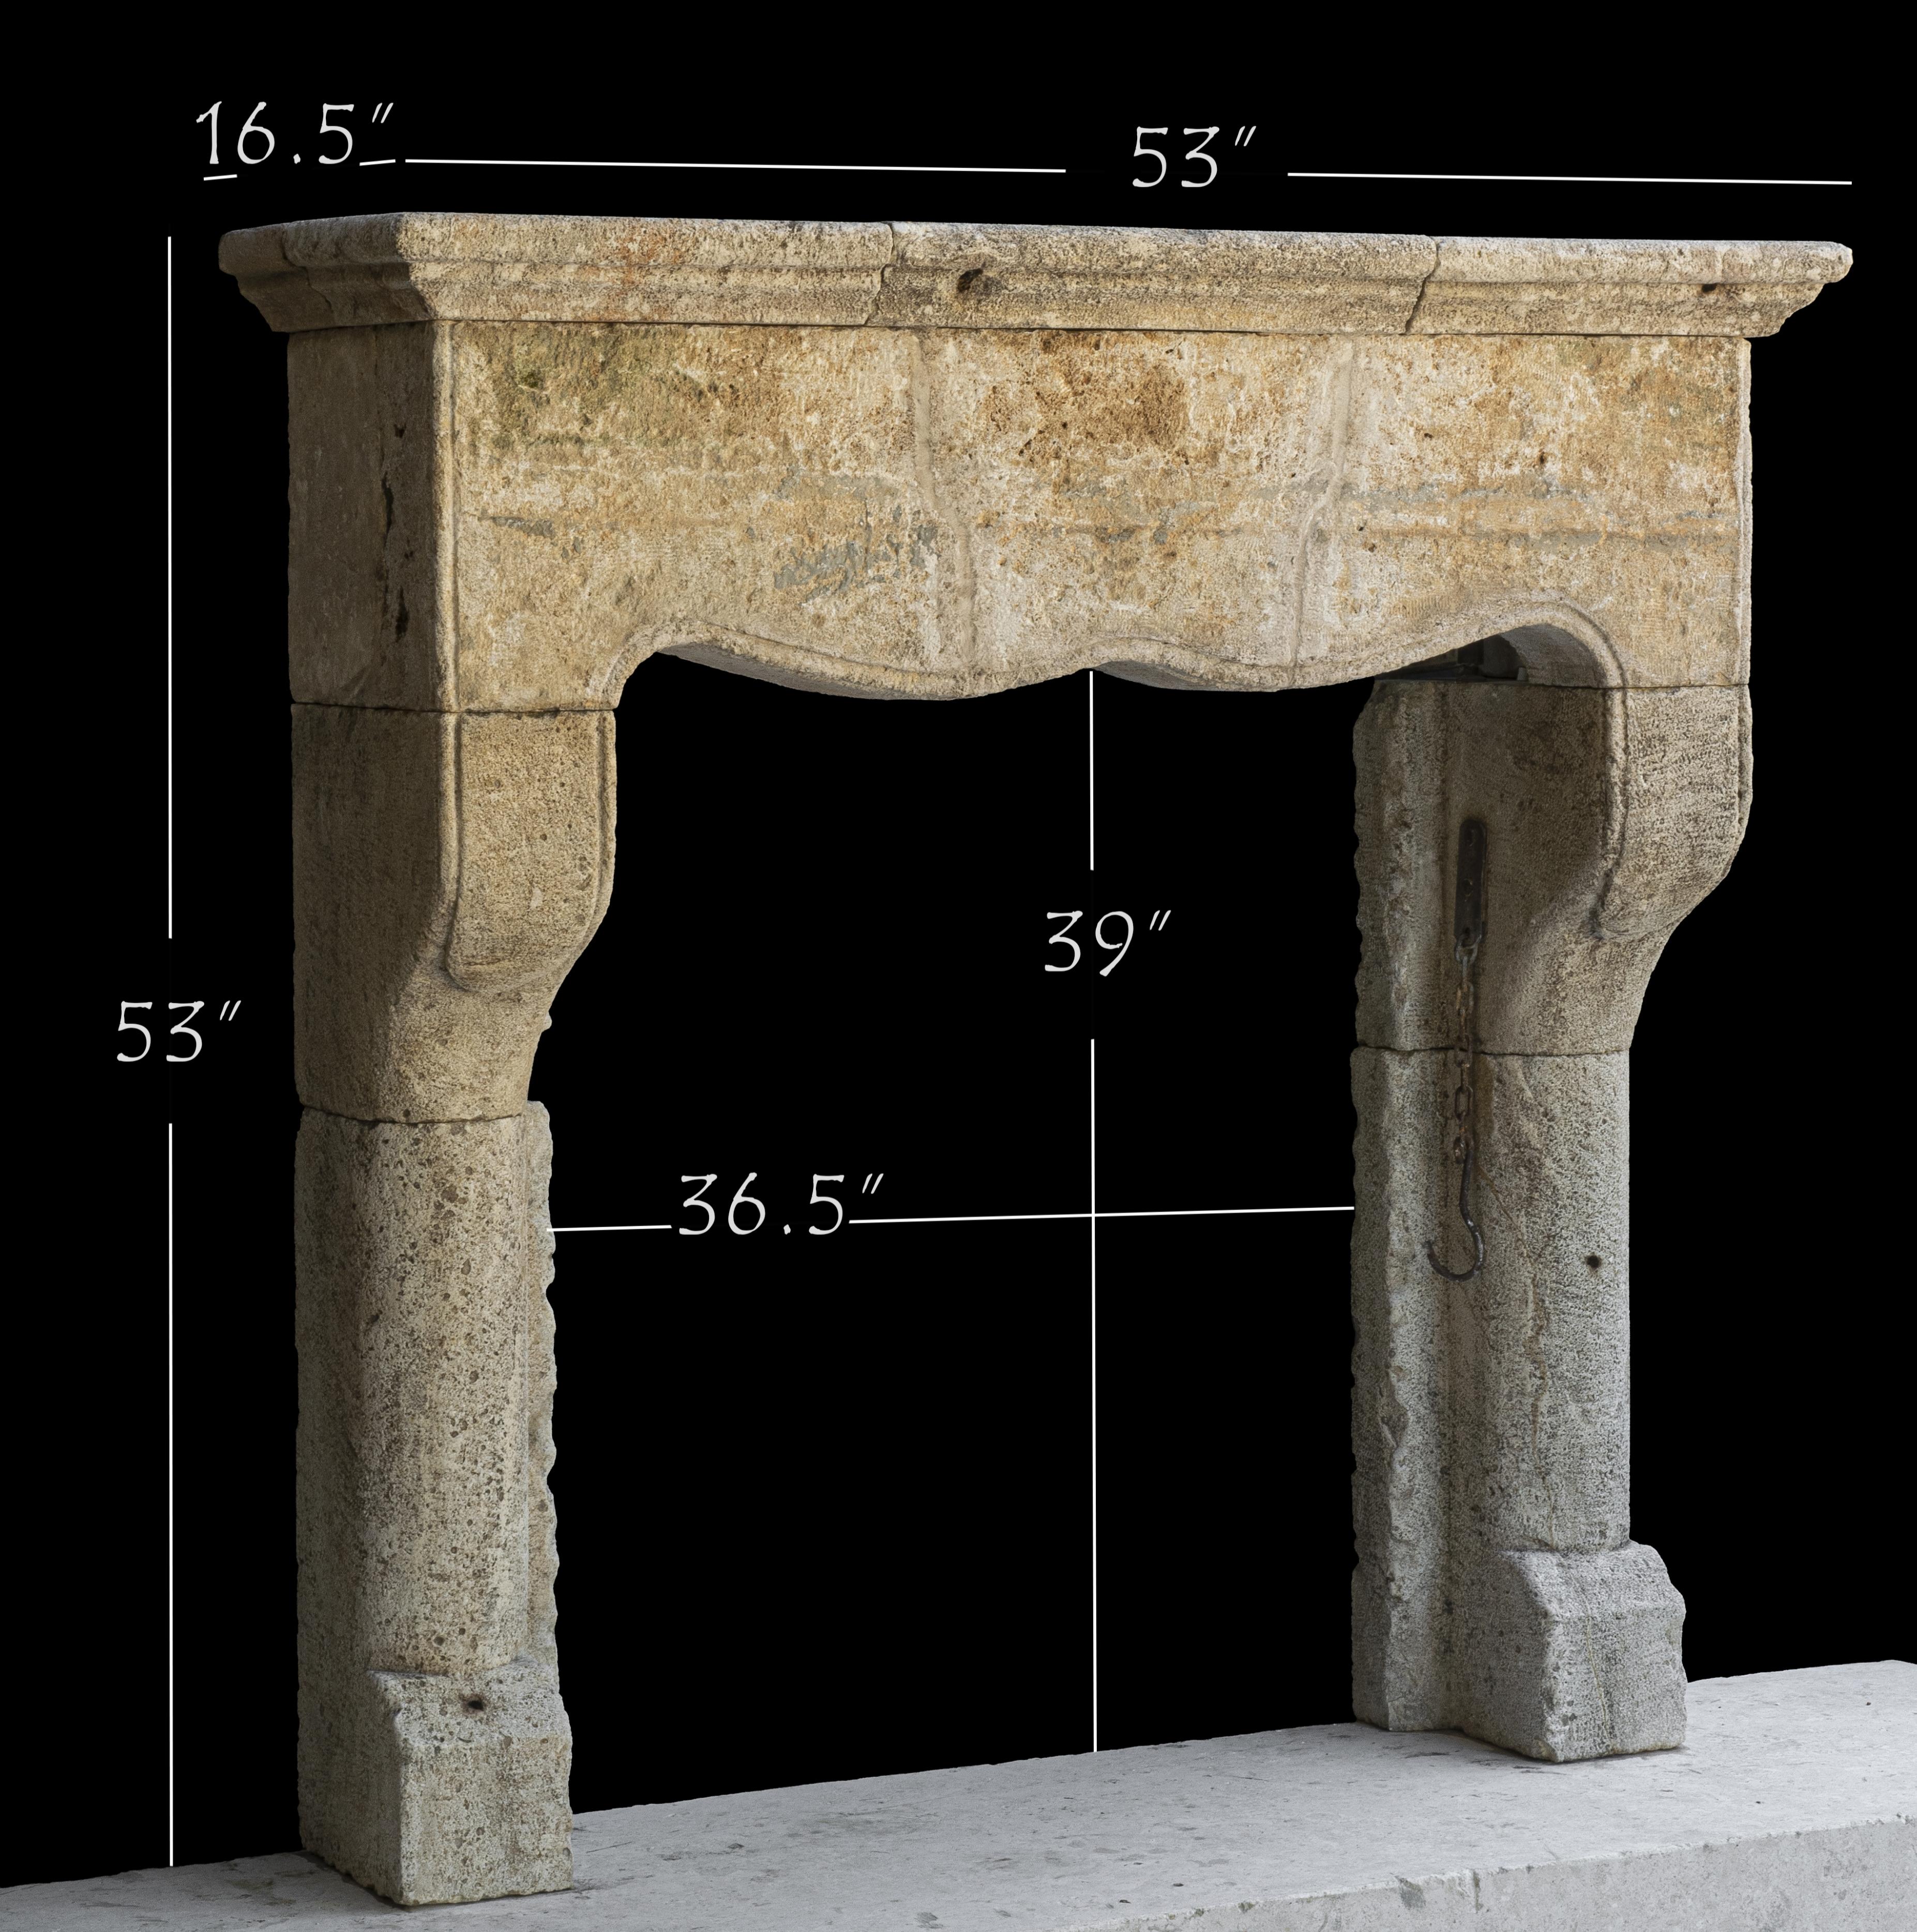 This limestone mantel is one of twelve fireplace mantels we have recently aquired from a chateau-like mansion in Italy. 

All twelve rare mantels were intricately hand carved by Italian master carvers and installed on site anywhere between